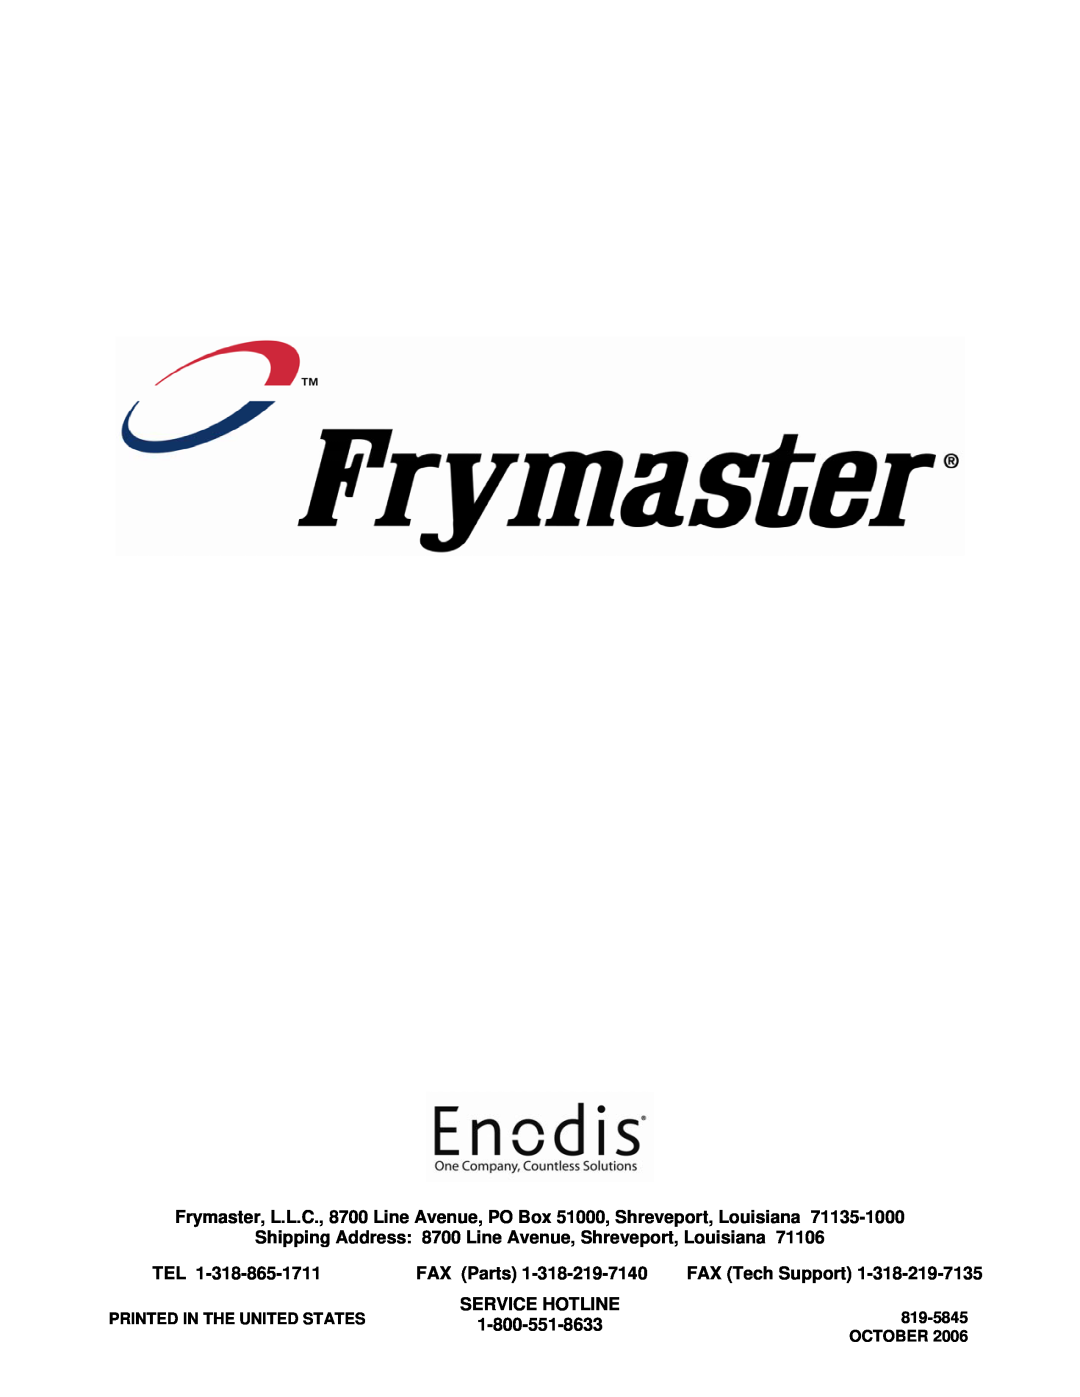 Frymaster FGP55 operation manual FAX Parts, FAX Tech Support, Service Hotline, 819-5845, October 